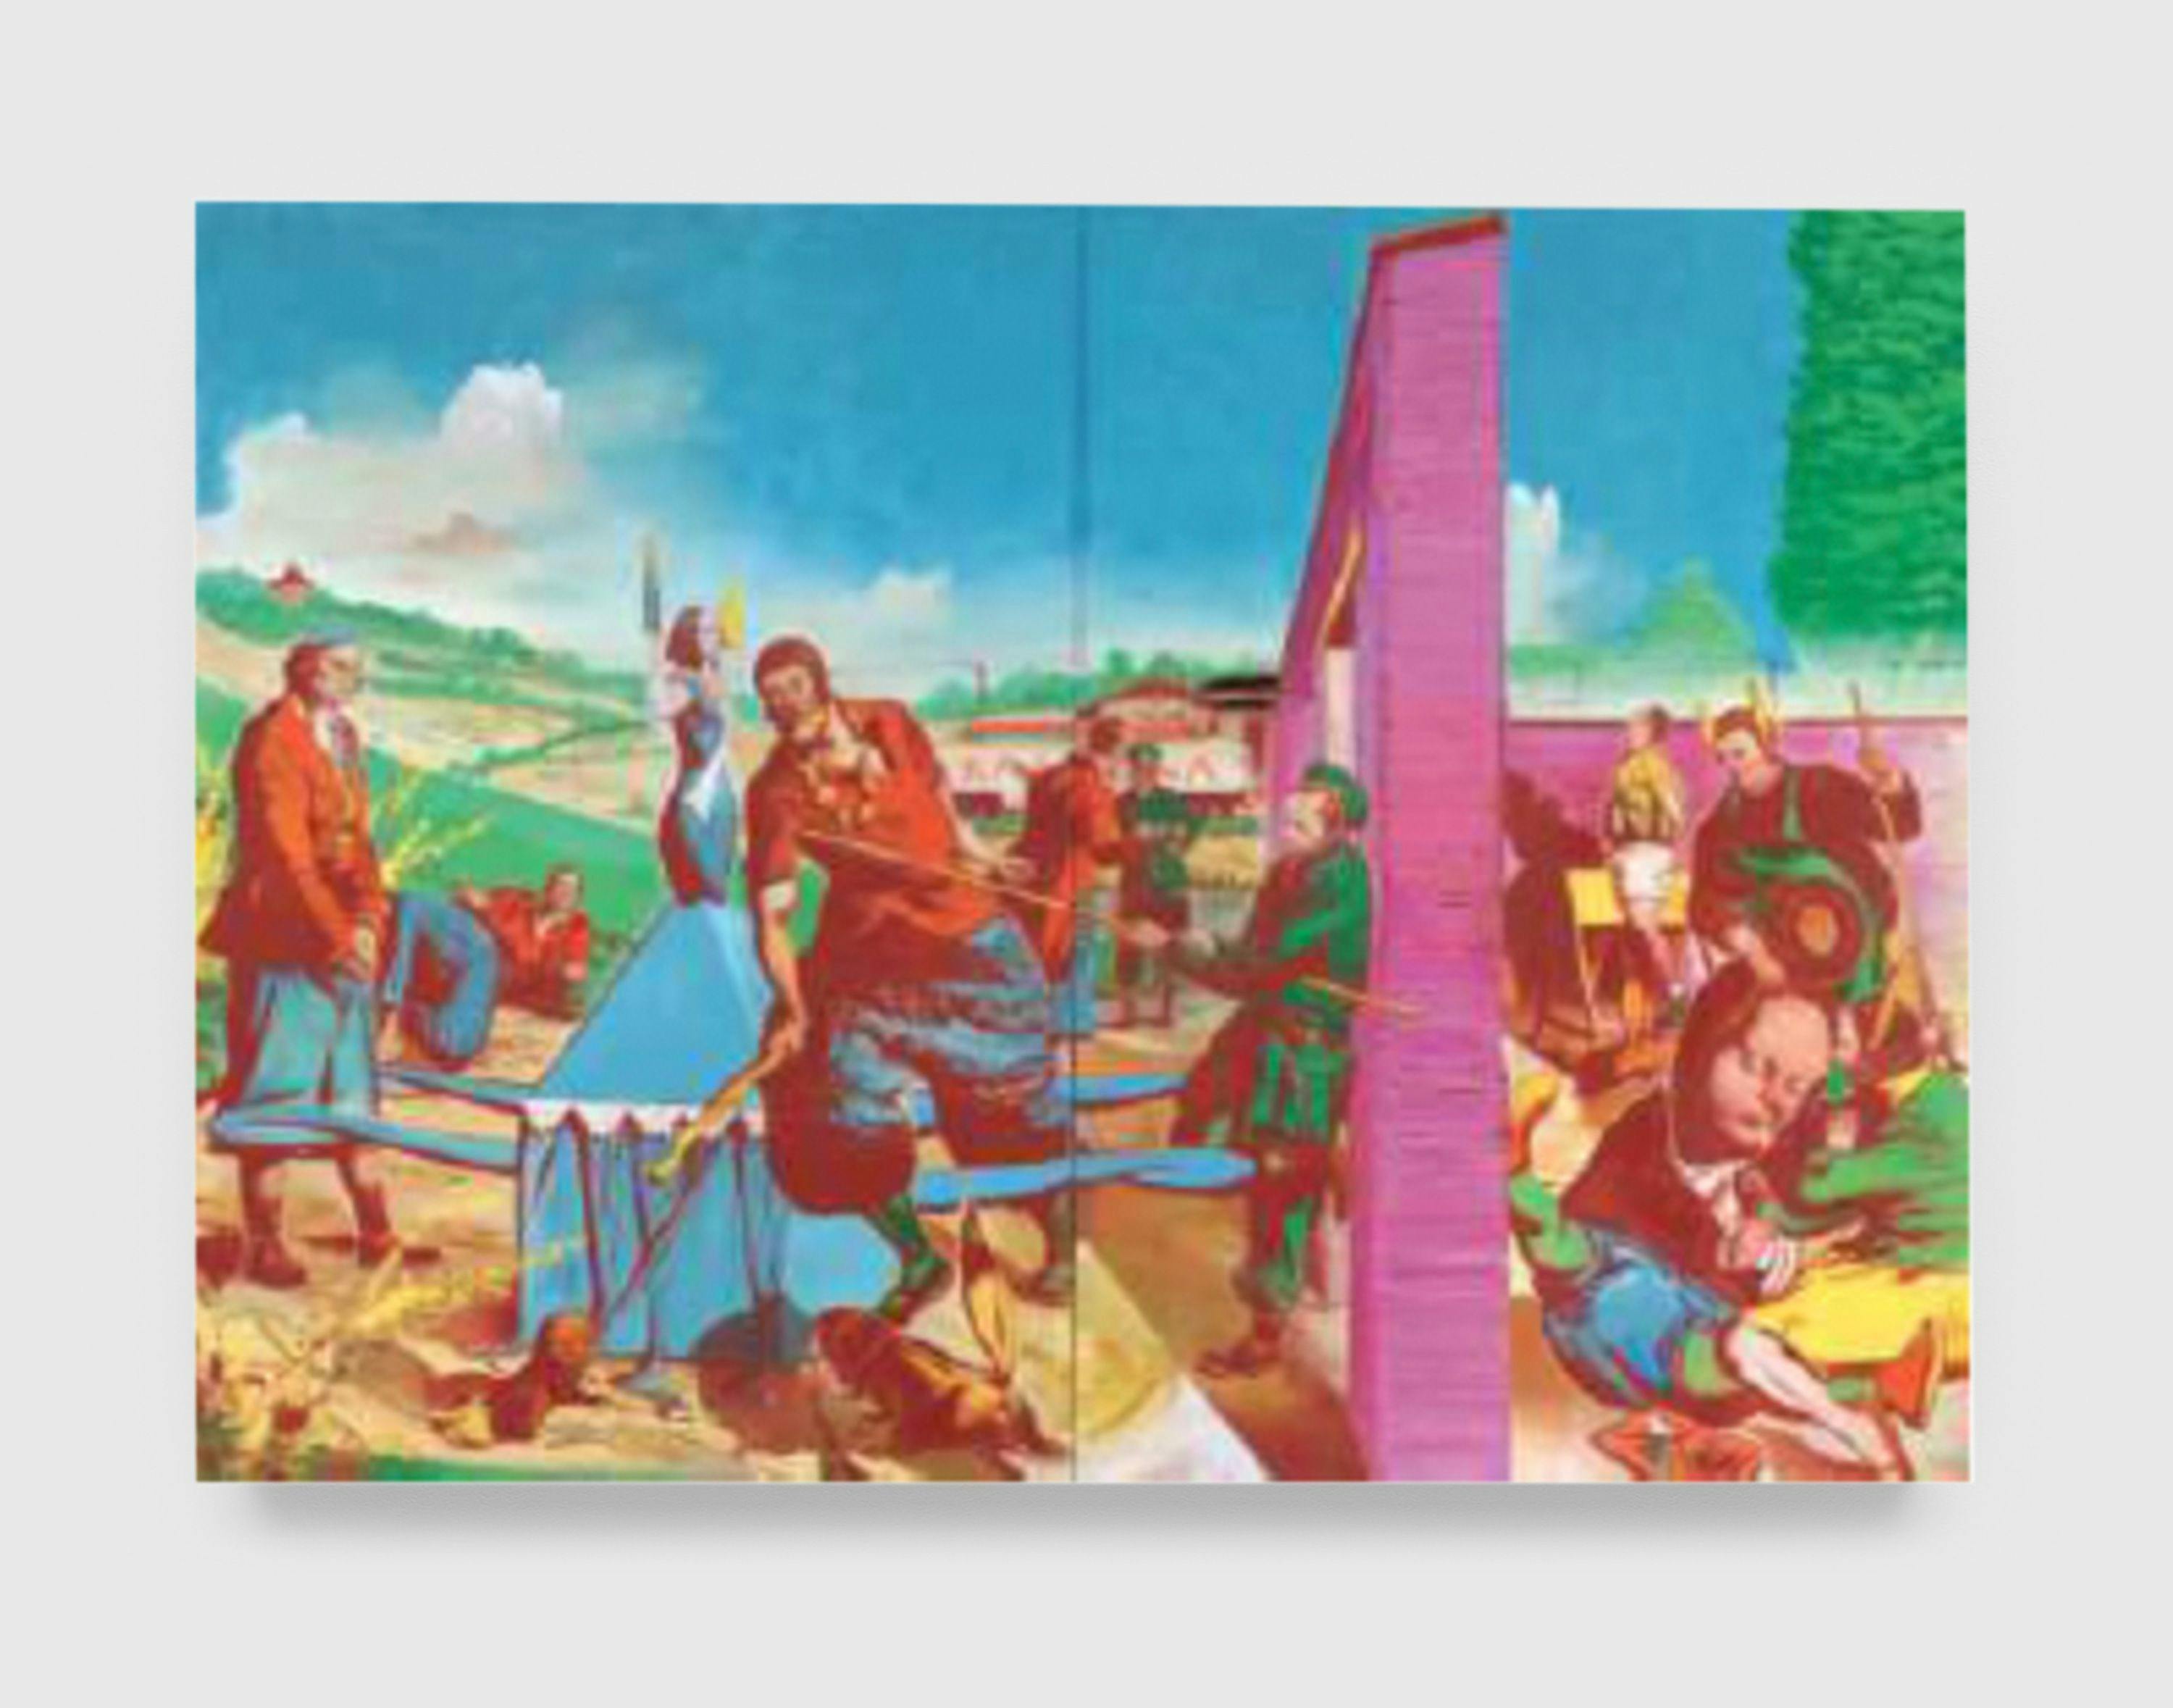 A painting by Neo Rauch, titled Die Kontrolle, dated 2010.